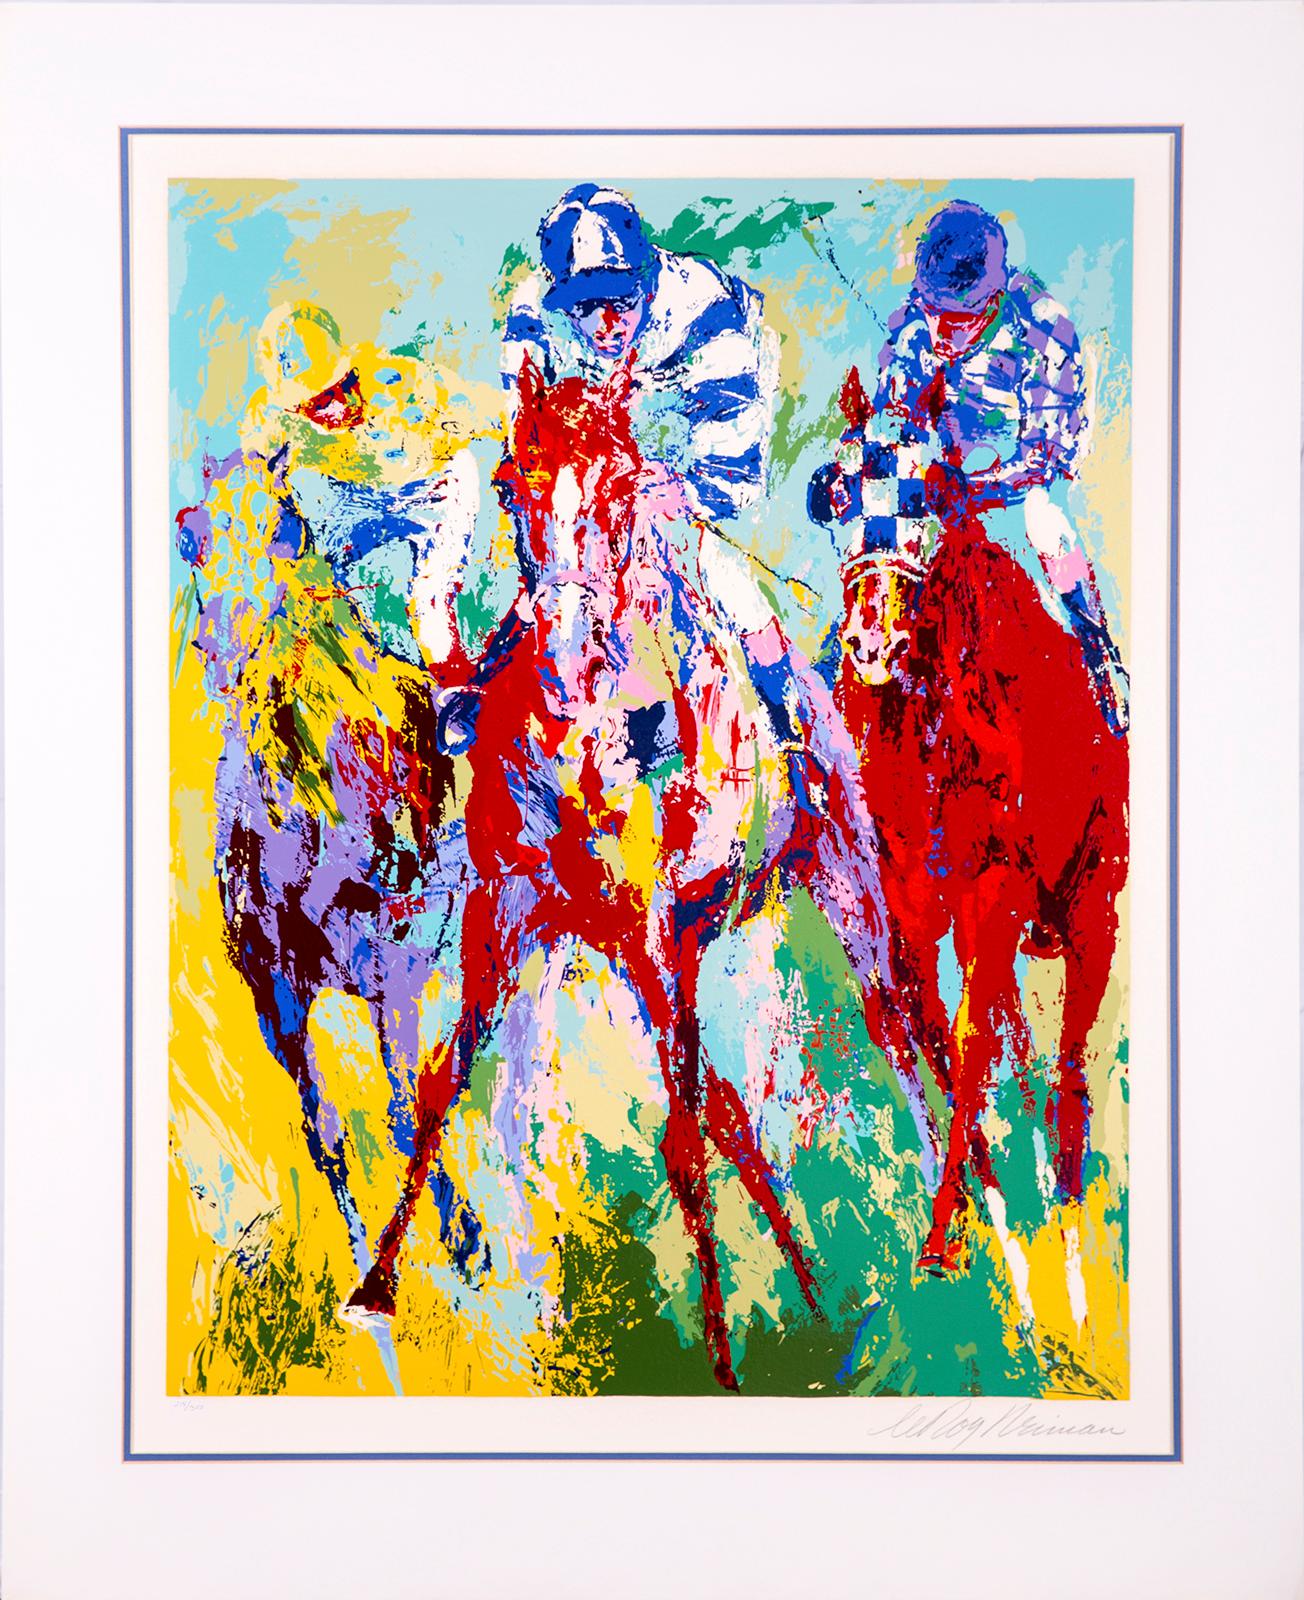 Artist: Leroy Neiman
Title: The Finish
Size: 33" x 26 3/8"
Framed: Not Framed (photos show options +$250)
Year: 1974
Edition: A.P.
Condition: This piece is in excellent condition and came from the original owner that has it stored away from sun